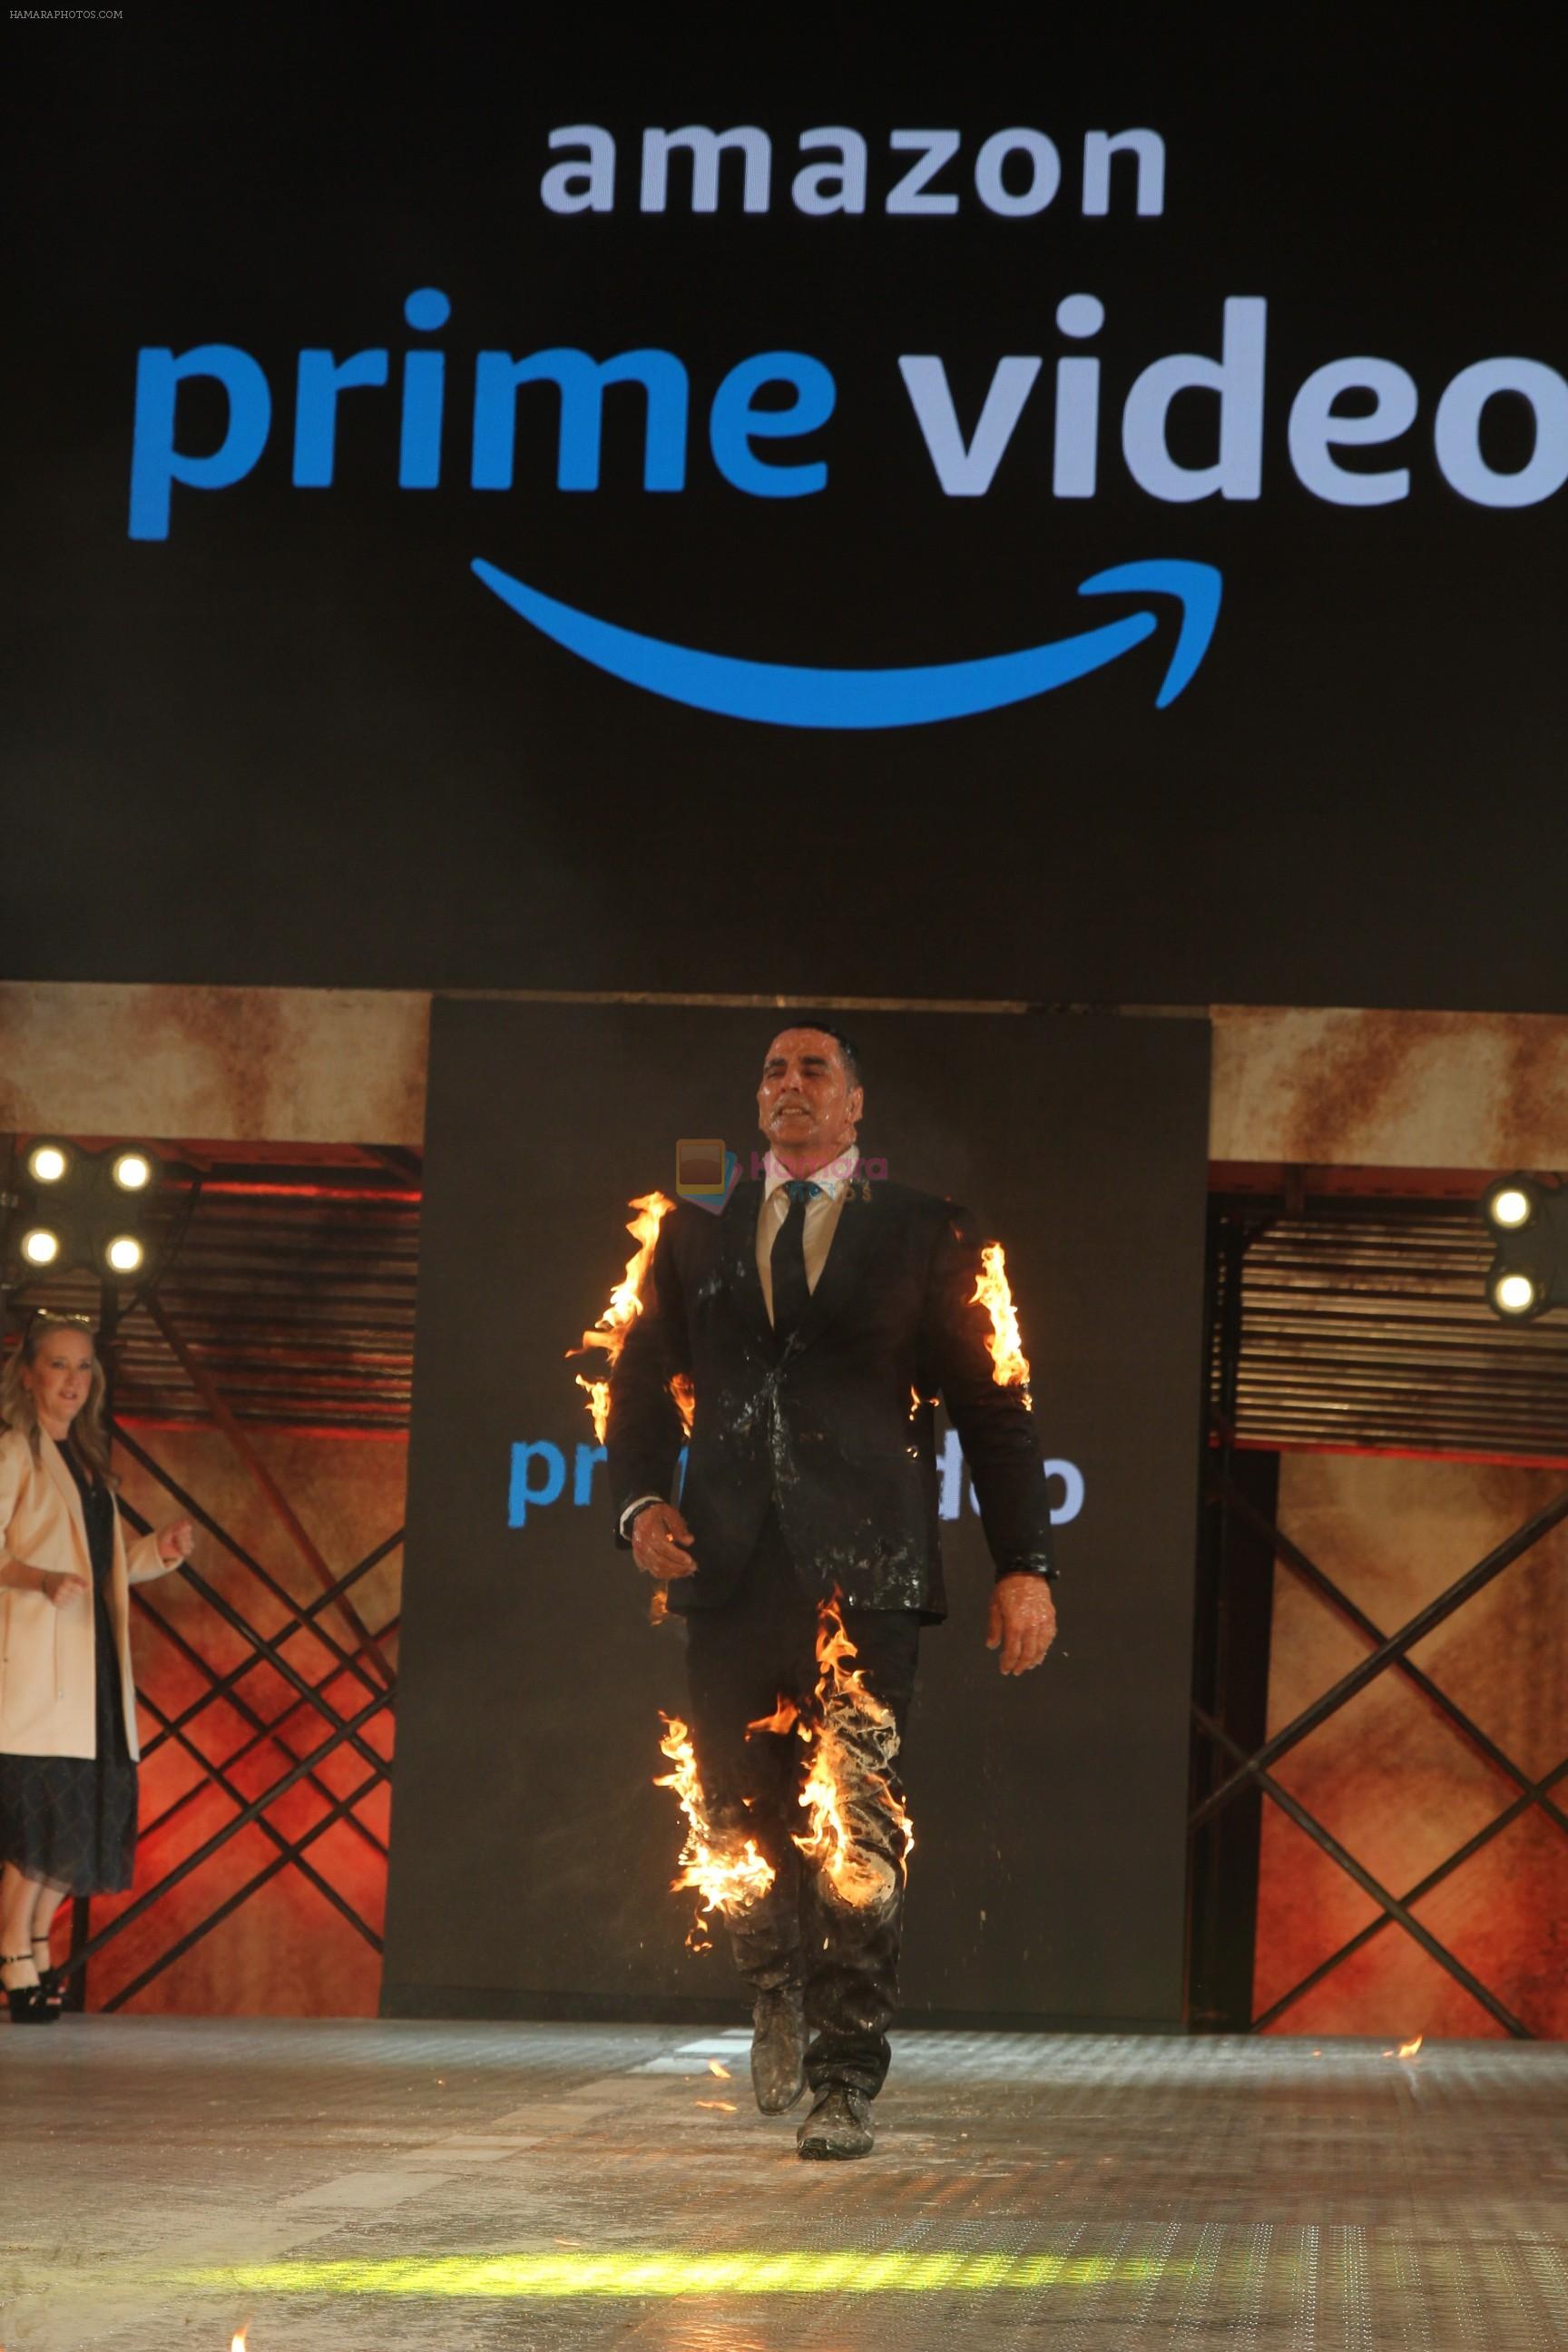 Akshay Kumar makes his digital debut with Amazon Prime Video at mahalxmi racecourse on 6th March 2019